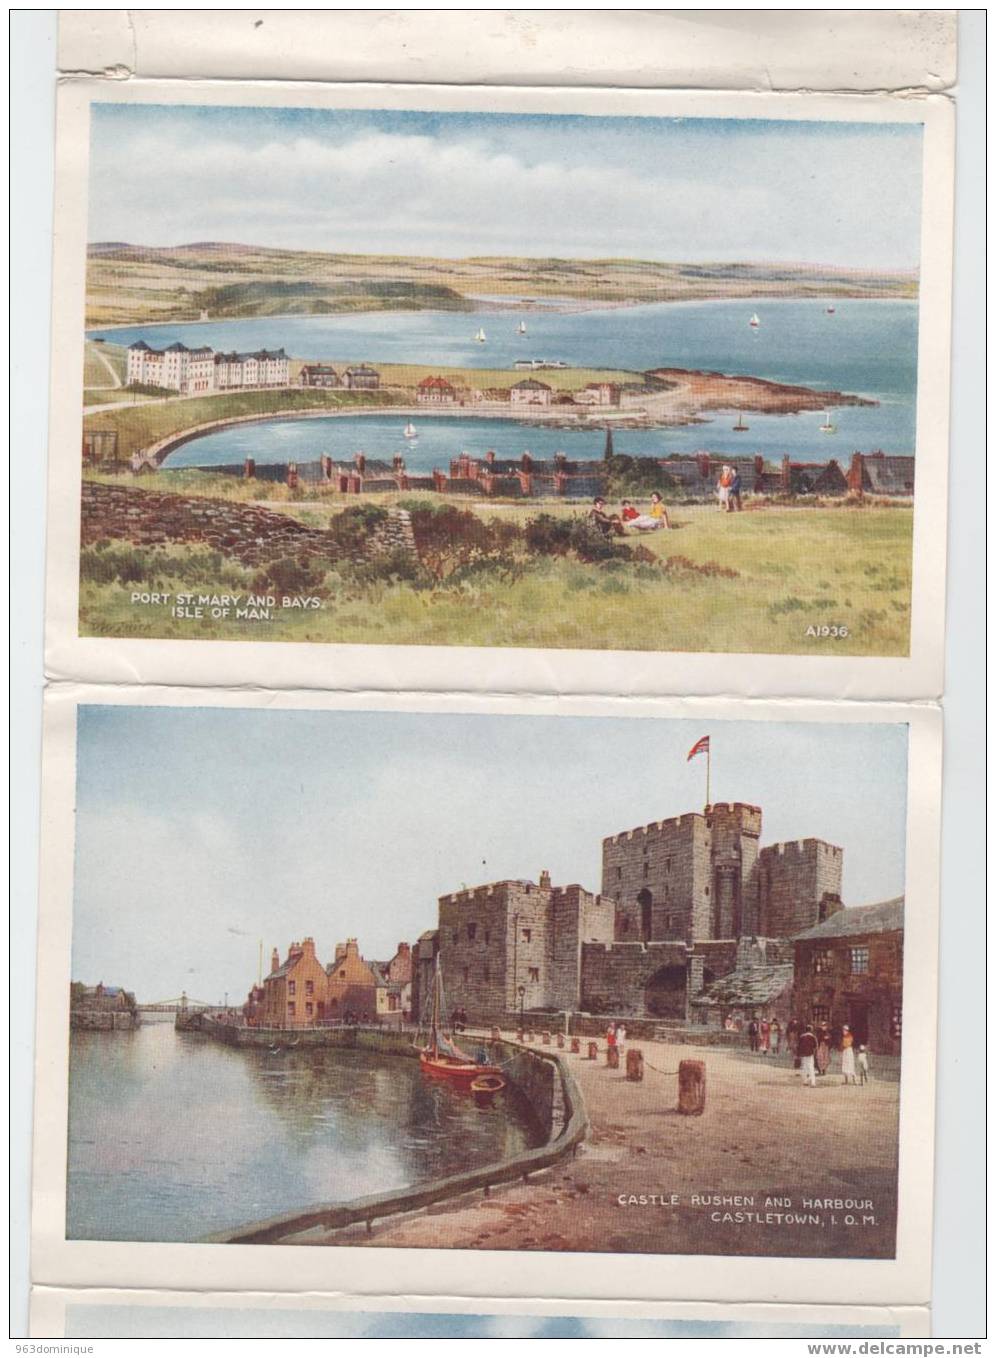 Isle Of Man - 6 View Letter Card Of Picturesque Manxland - Isle Of Man, Castletown - Isle Of Man